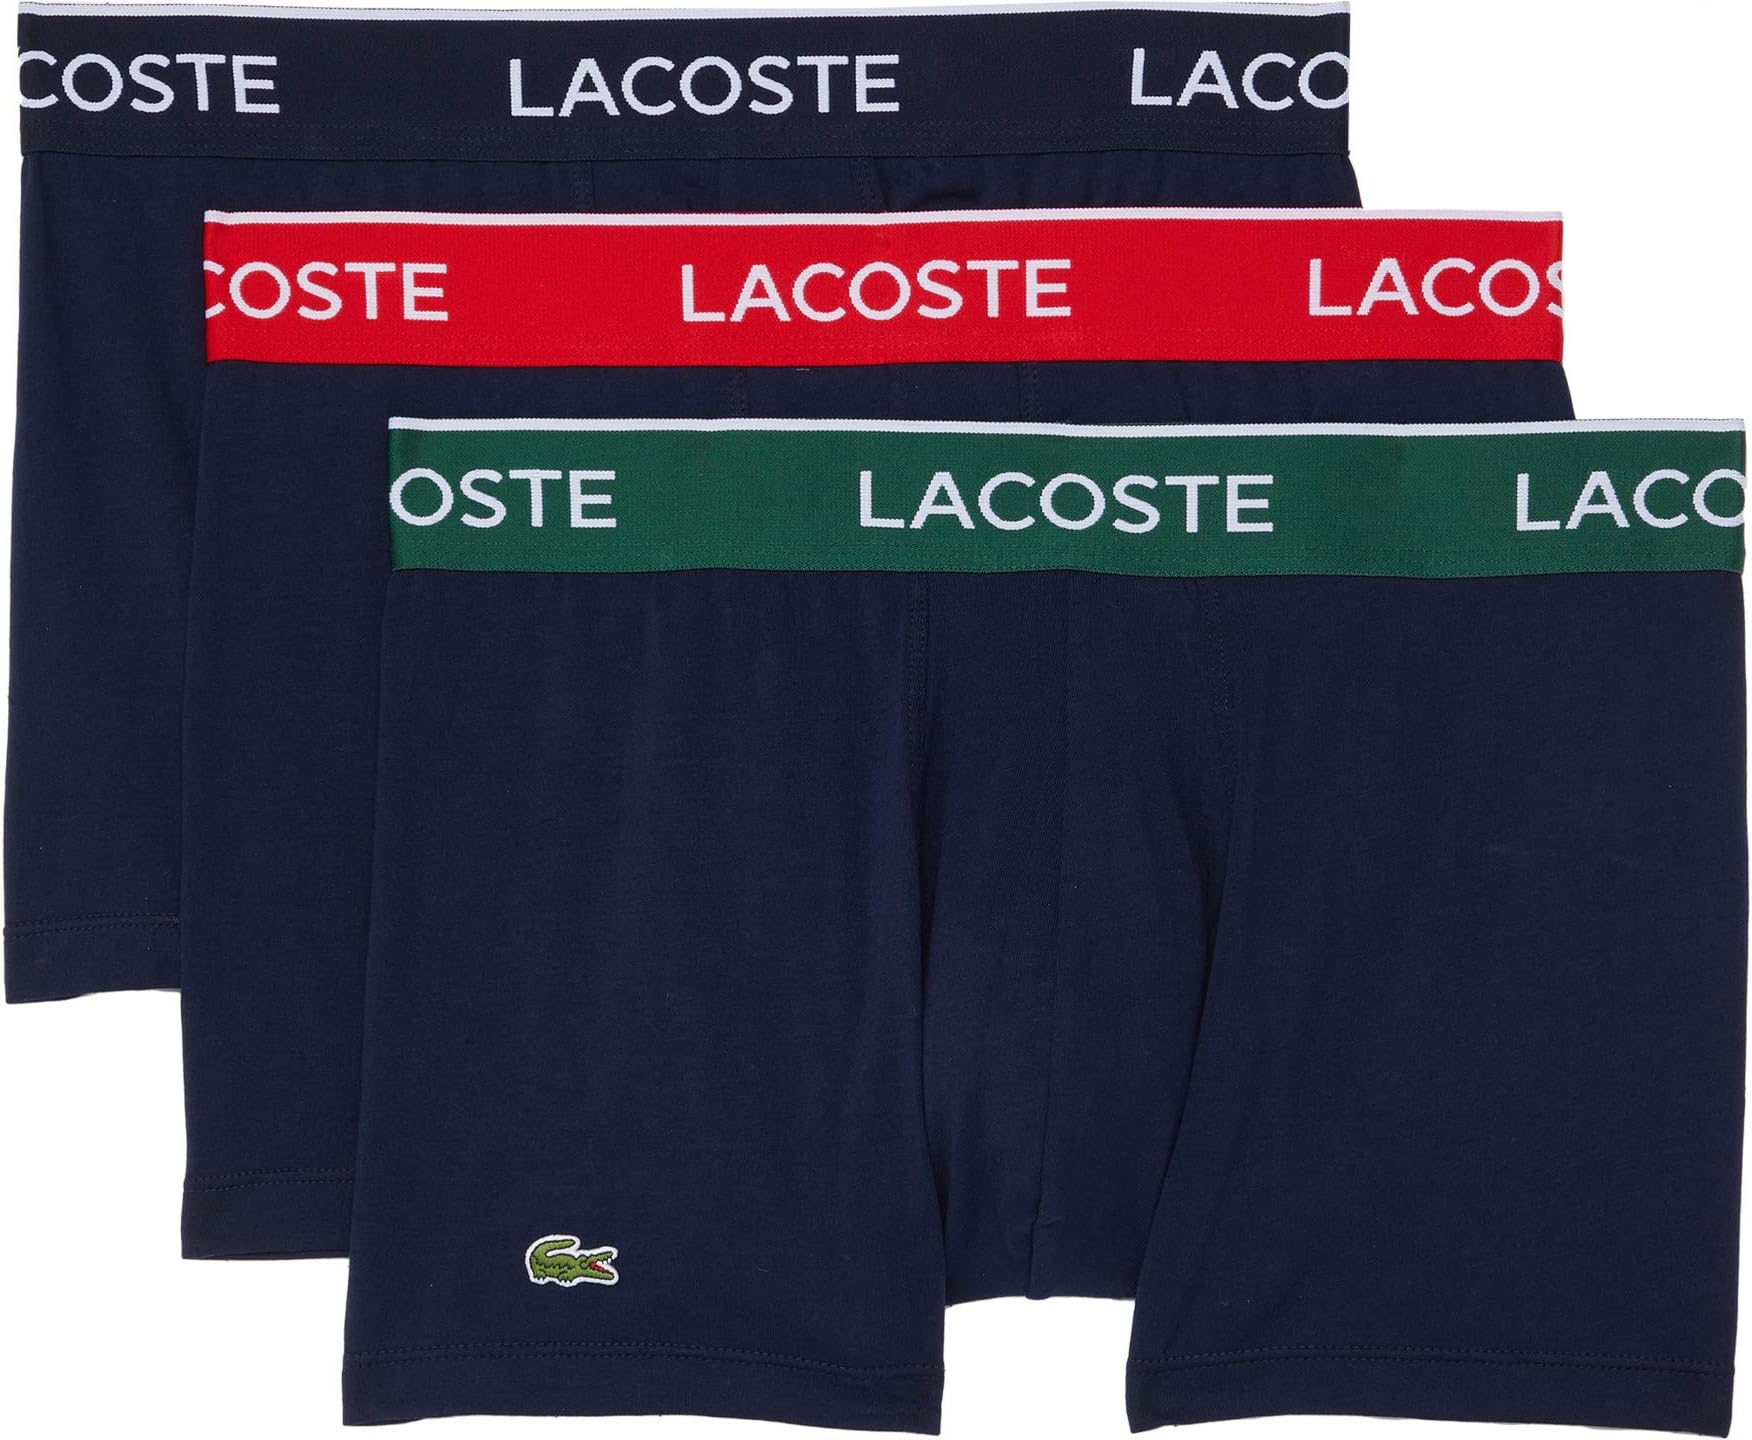 Трусы Trunks 3-Pack Casual Classic Colorful Waistband Lacoste, цвет Navy Blue/Green/Red/Navy Blue fierte female large size blouse rg6412 v neck open shoulder flower pattern half sleeve summer casual red black navy blue indigo green